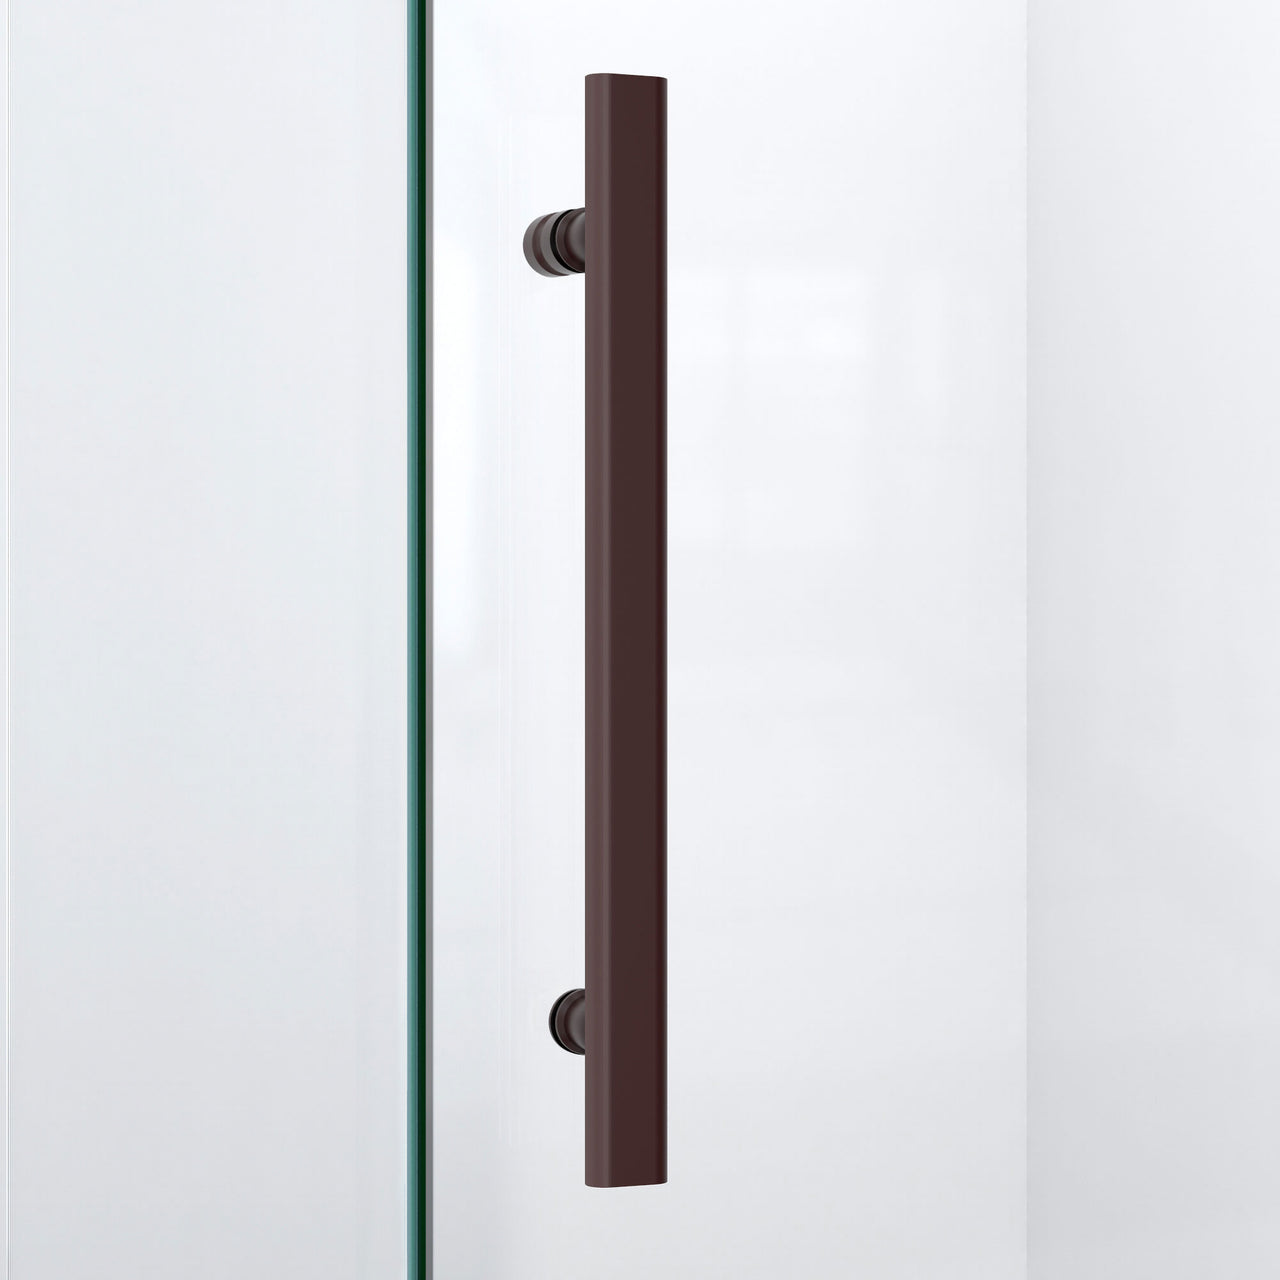 DreamLine Prism Lux 42 in. x 42 in. x 74 3/4 in. H Frameless Hinged Shower Enclosure and SlimLine Shower Base Kit - BNGBath